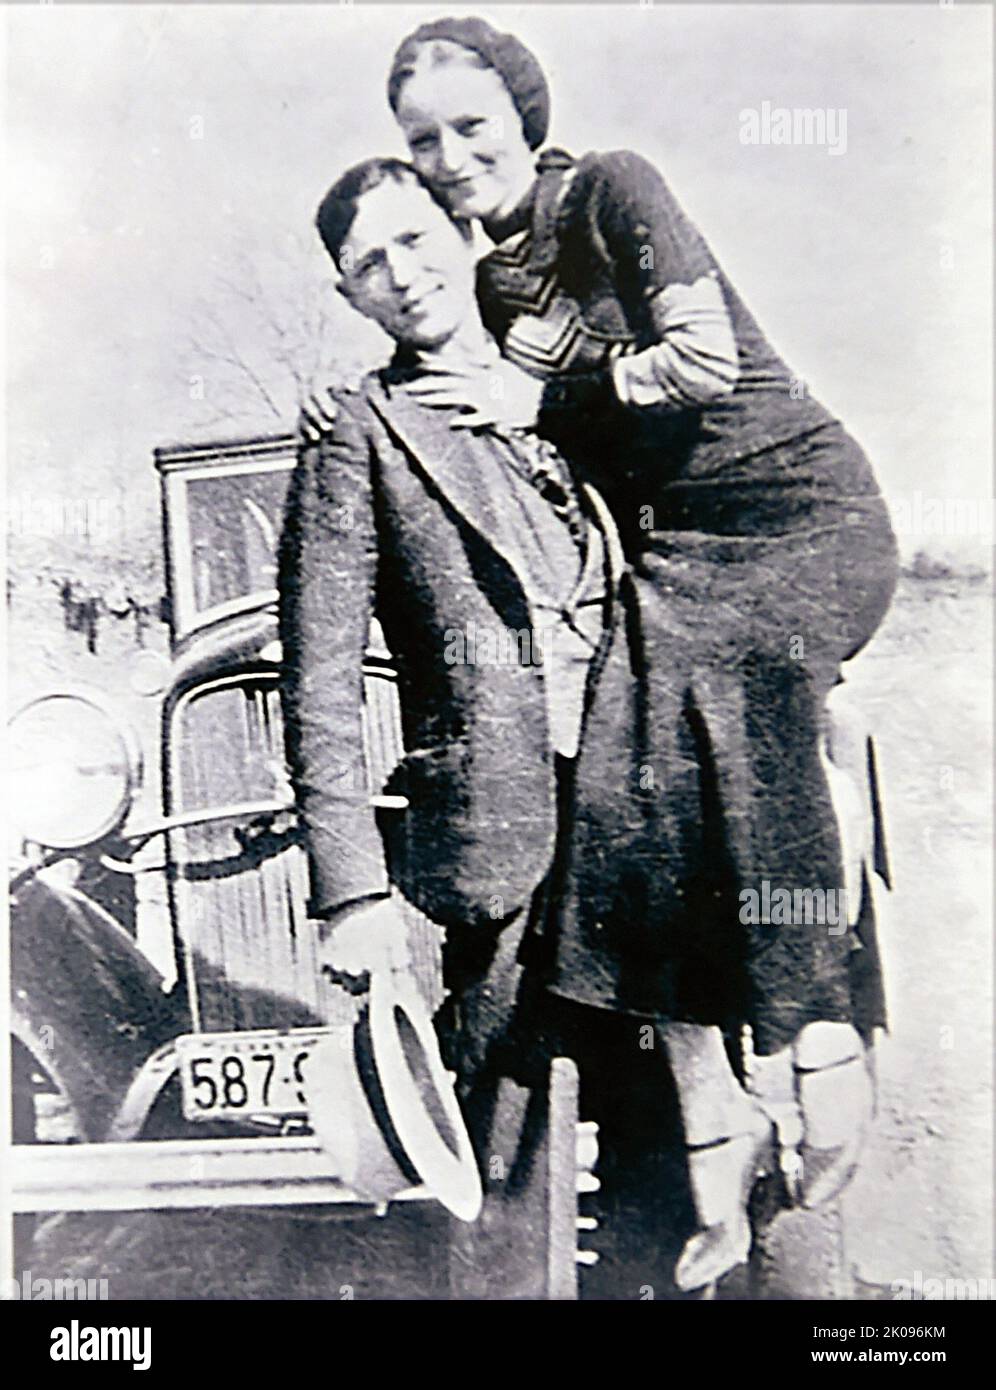 Bonnie and Clyde. Bonnie Elizabeth Parker (October 1, 1910 - May 23, 1934) and Clyde Chestnut Barrow (March 24, 1909 - May 23, 1934) were an American criminal couple who travelled the Central United States with their gang during the Great Depression, known for their bank robberies, although they preferred to rob small stores or rural funeral homes. Their exploits captured the attention of the American press and its readership during what is occasionally referred to as the "public enemy era" between 1931 and 1934. Stock Photo